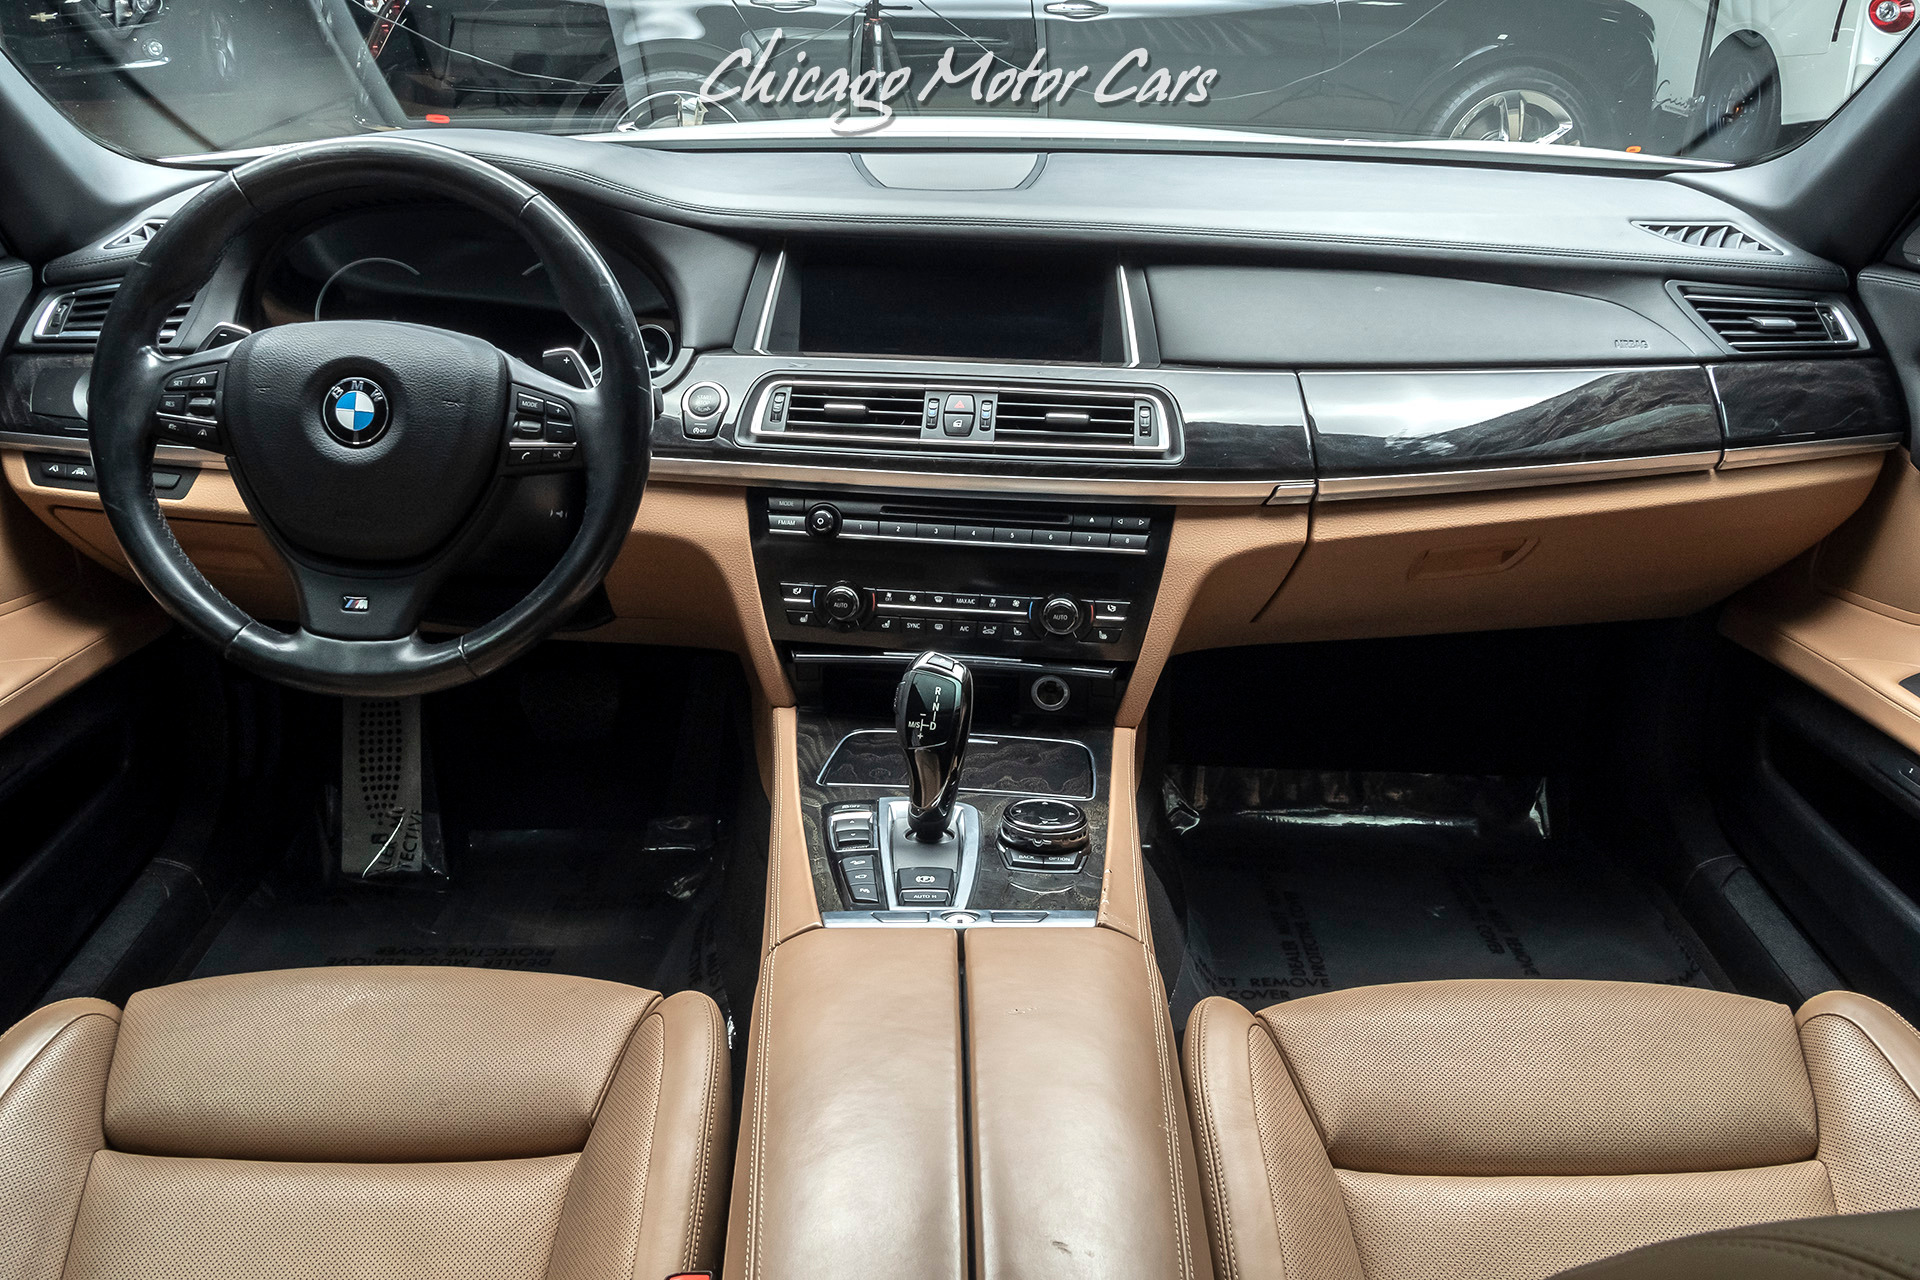 Used 2015 BMW 7 Series 750Li xDrive Sedan MSRP $99K+ M SPORT & EXECUTIVE  PACKGE! For Sale (Special Pricing) | Chicago Motor Cars Stock #17027